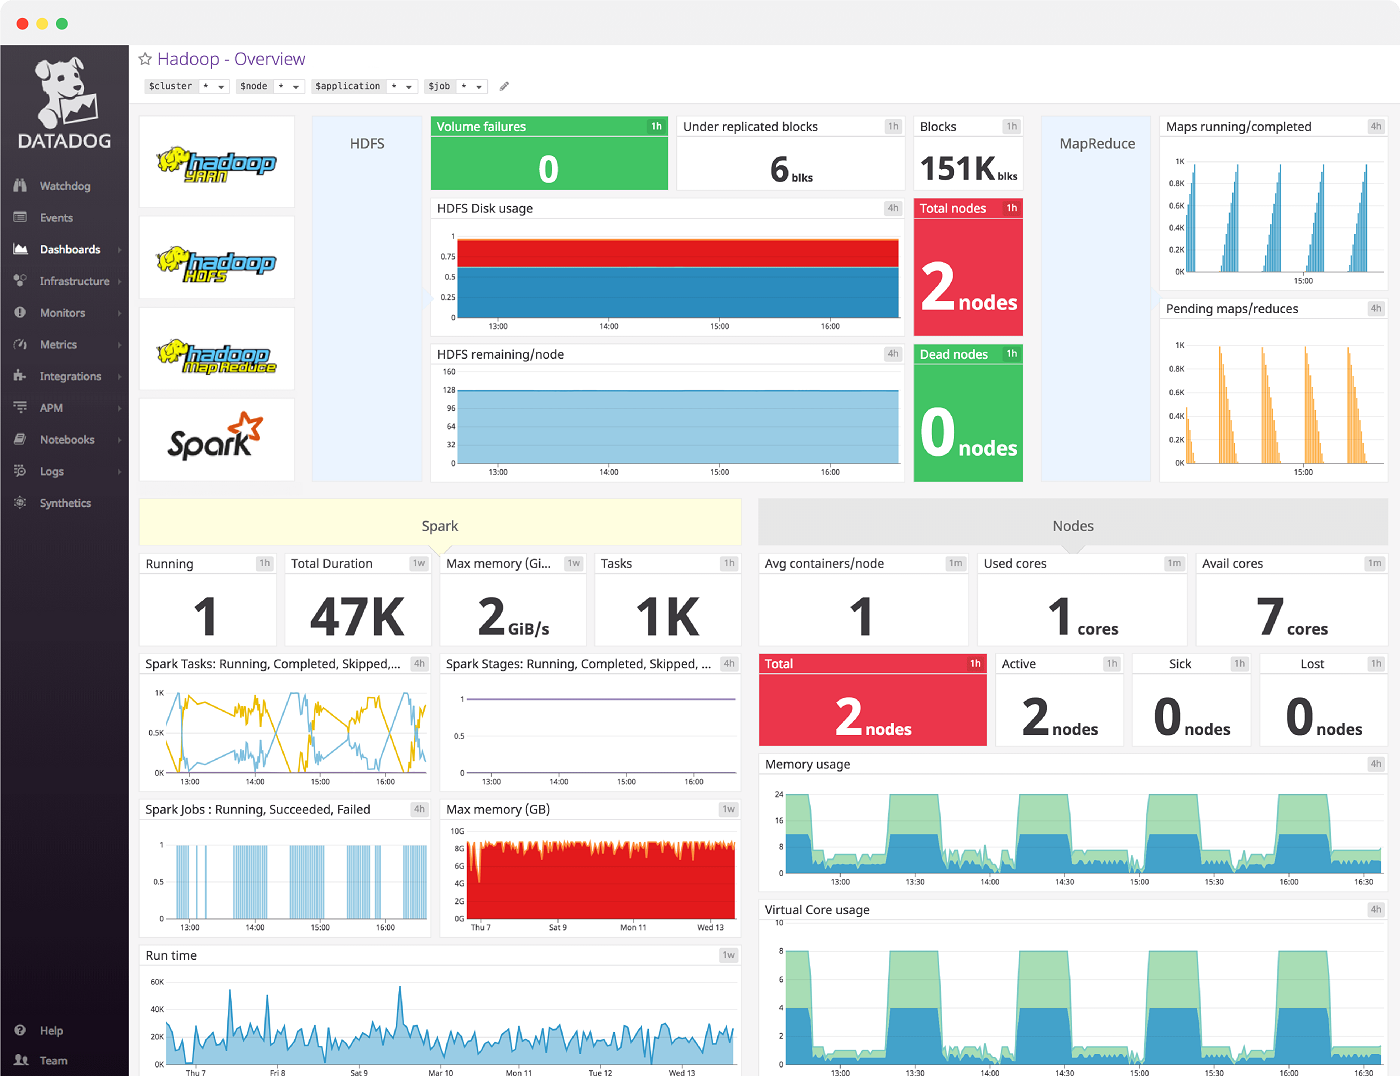 Screenshot of Hadoop data visualization created with Datadog's out-of-the-box dashboard.